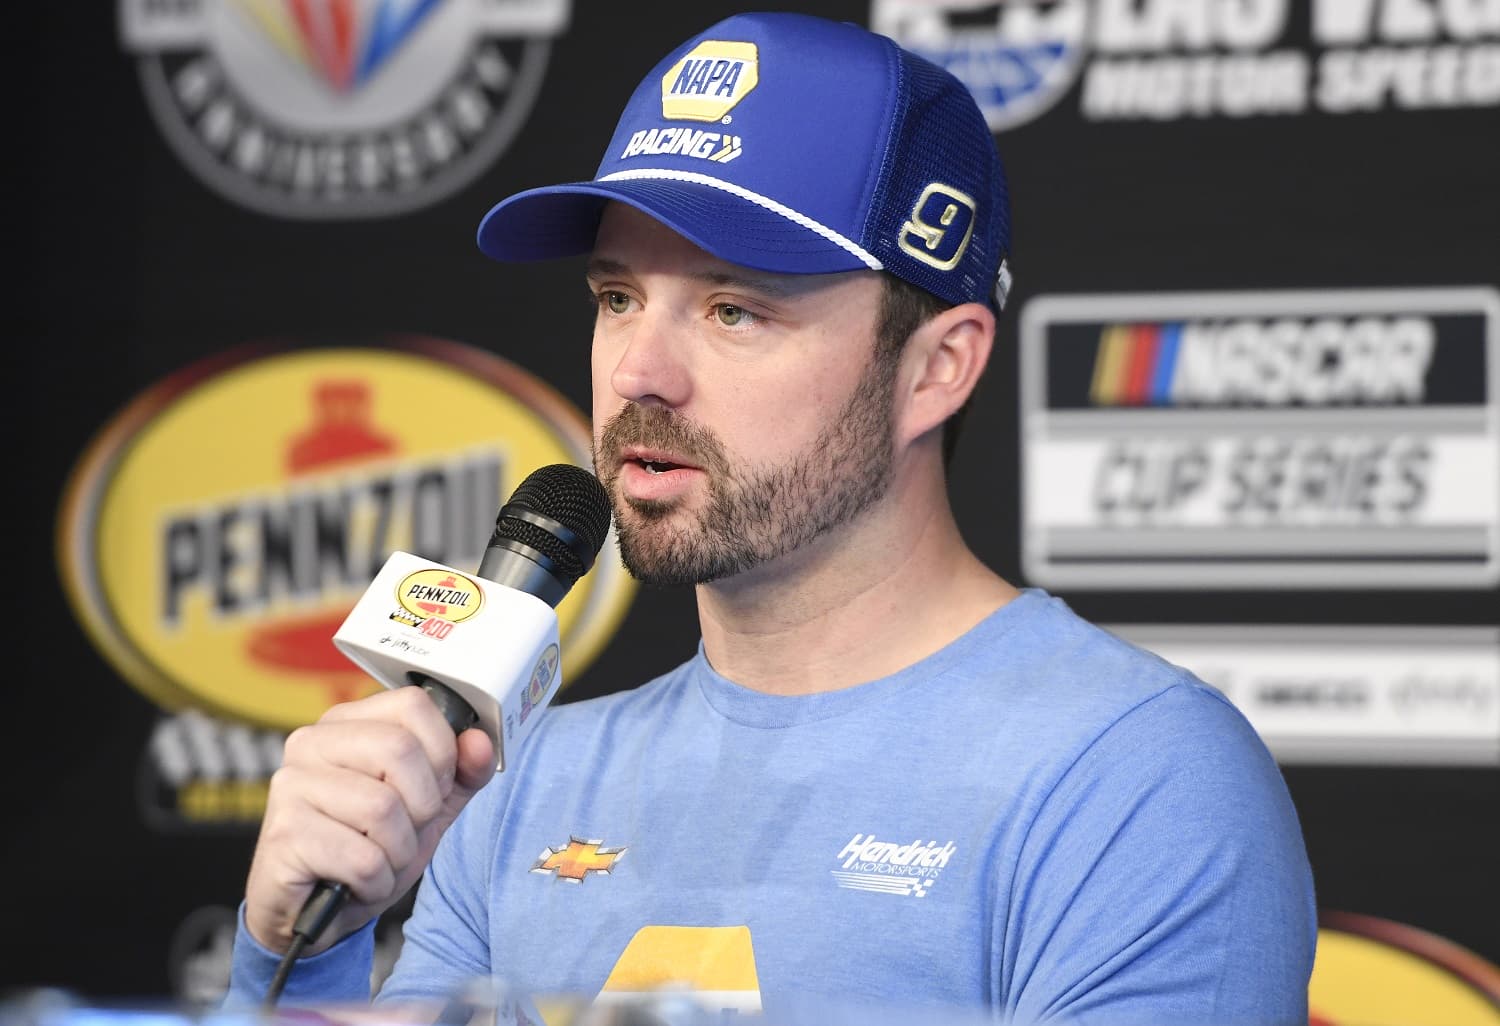 Josh Berry addresses the media before practice for the NASCAR Cup Series Pennzoil 400 on March 4, 2023, at Las Vegas Motor Speedway.